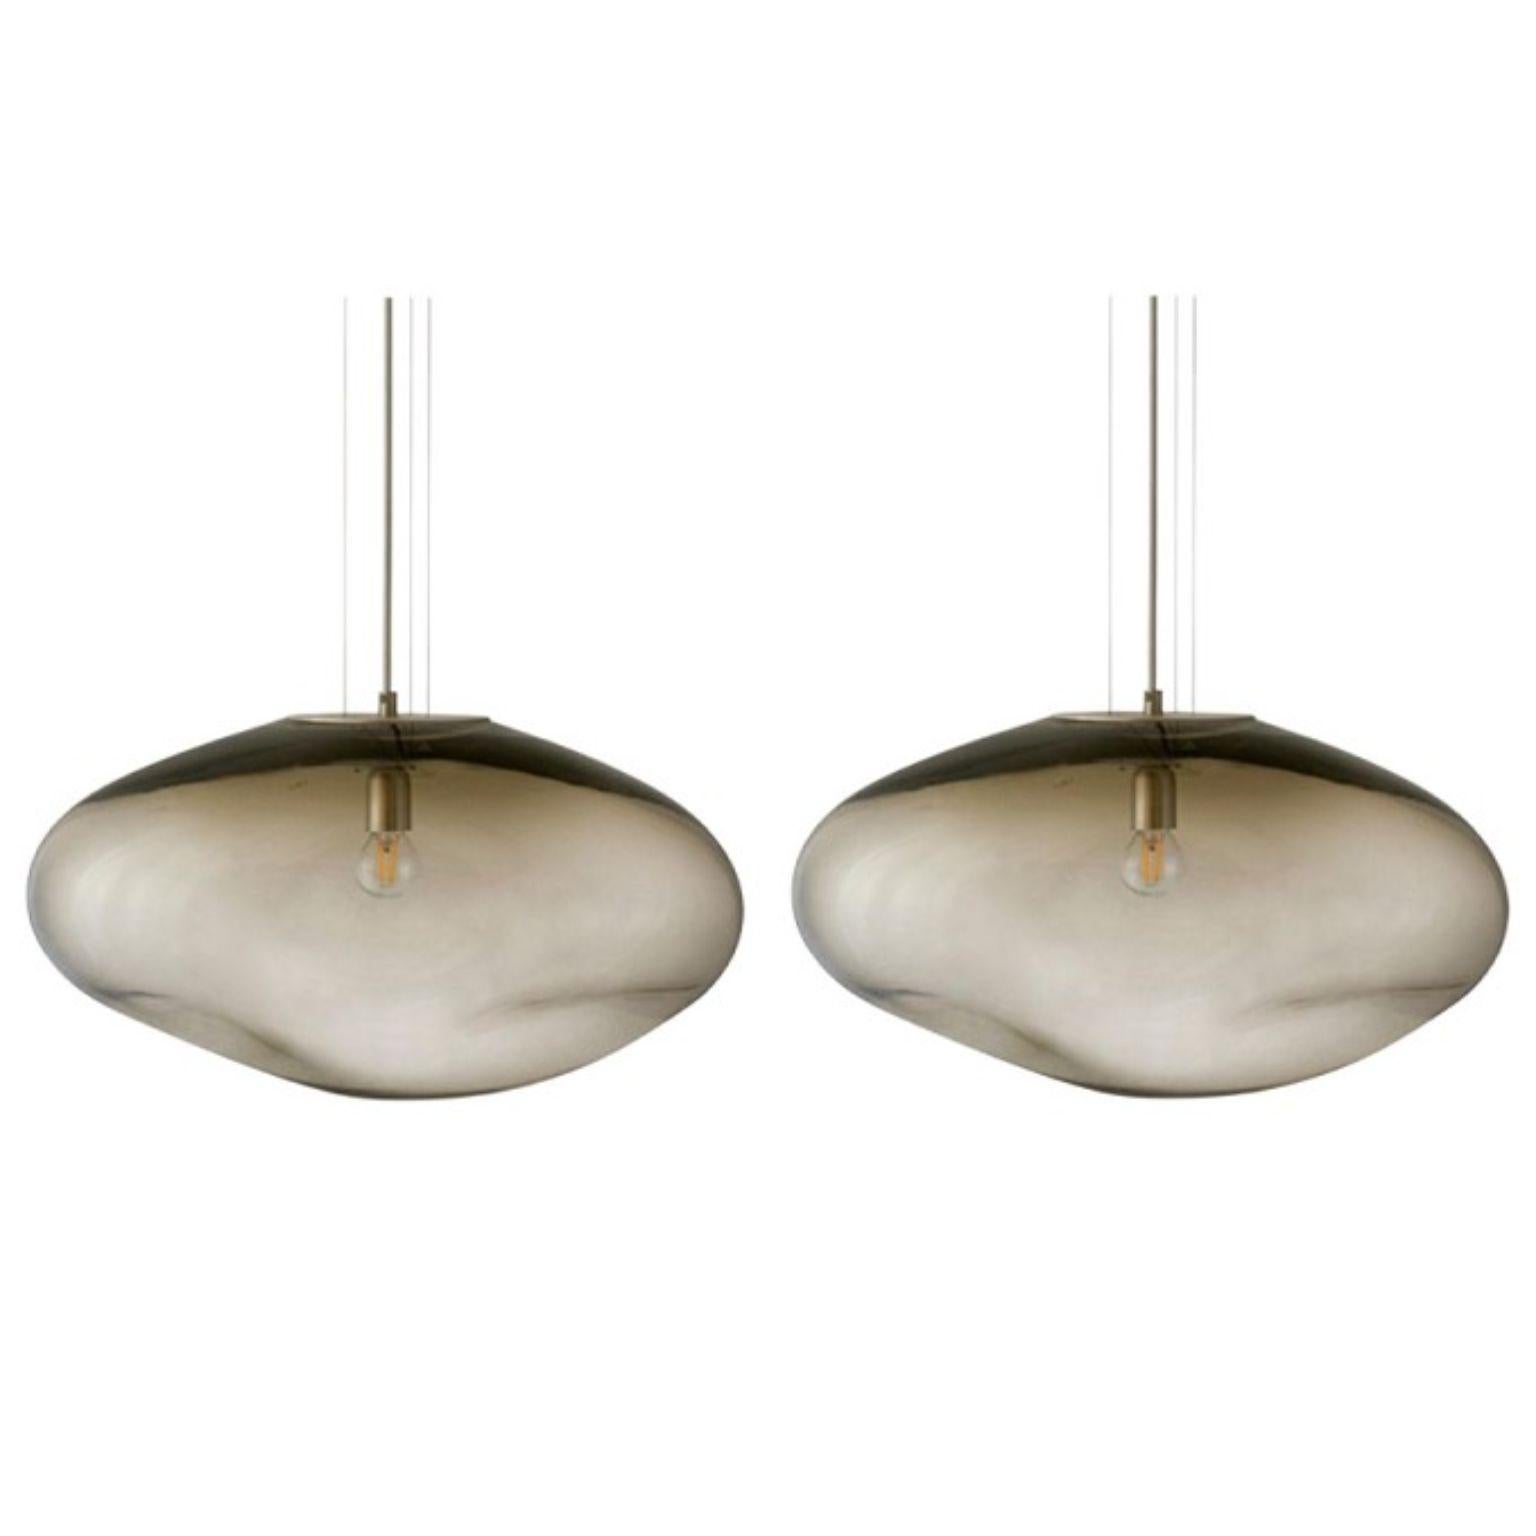 Set of 2 haumea amorph silver smoke xl pendants by Eloa.
No UL listed 
Material: glass,steel,silver, LED bulb.
Dimensions: D 35 x W 47 x H 32 cm.
Also available in different colours and dimensions.

All our lamps can be wired according to each